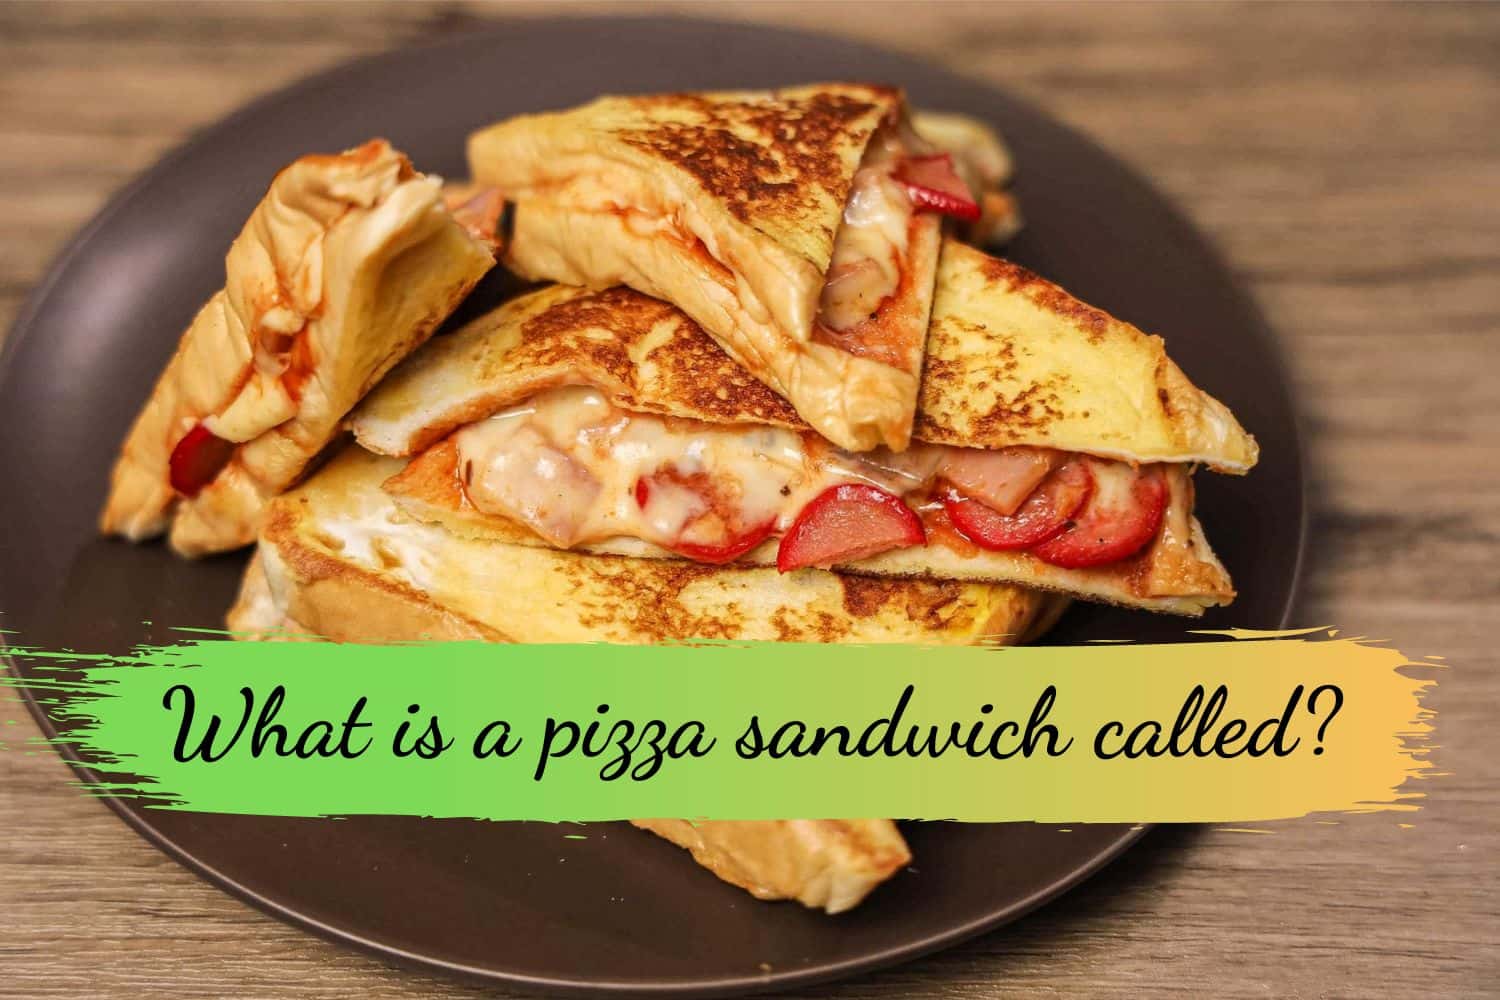 What is a pizza sandwich called?